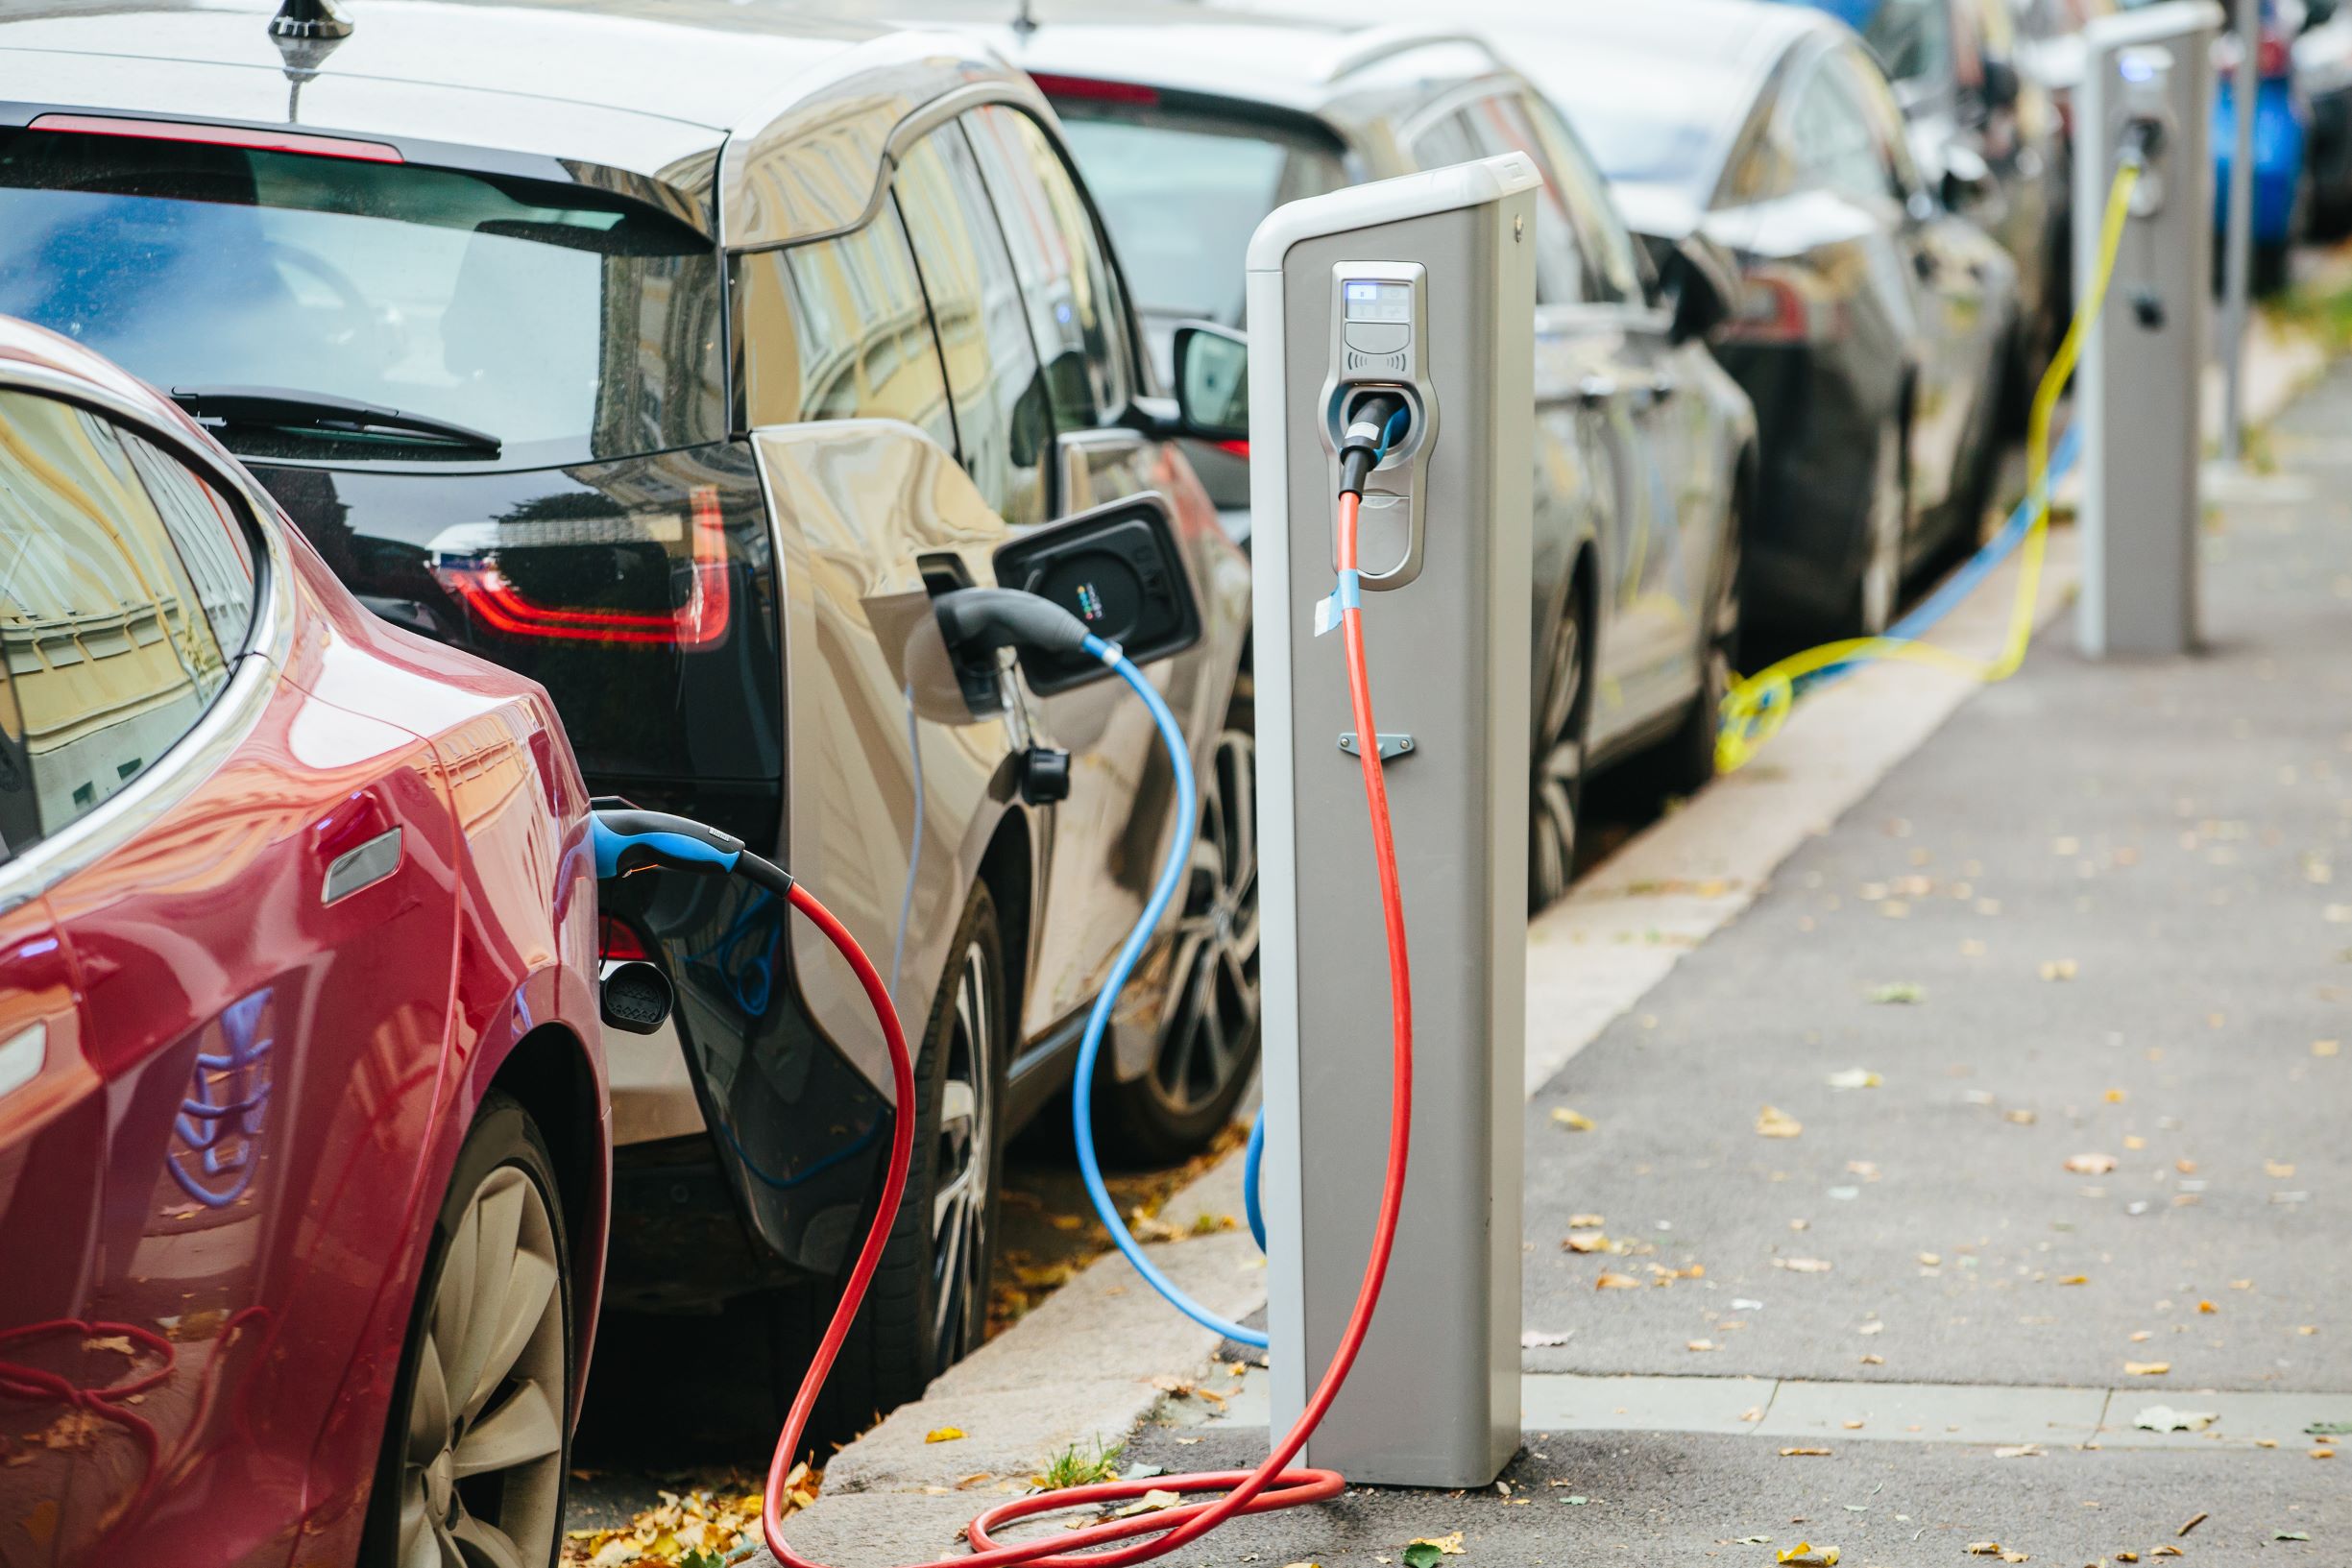 Canada should invest in electric vehicle transition post COVID19